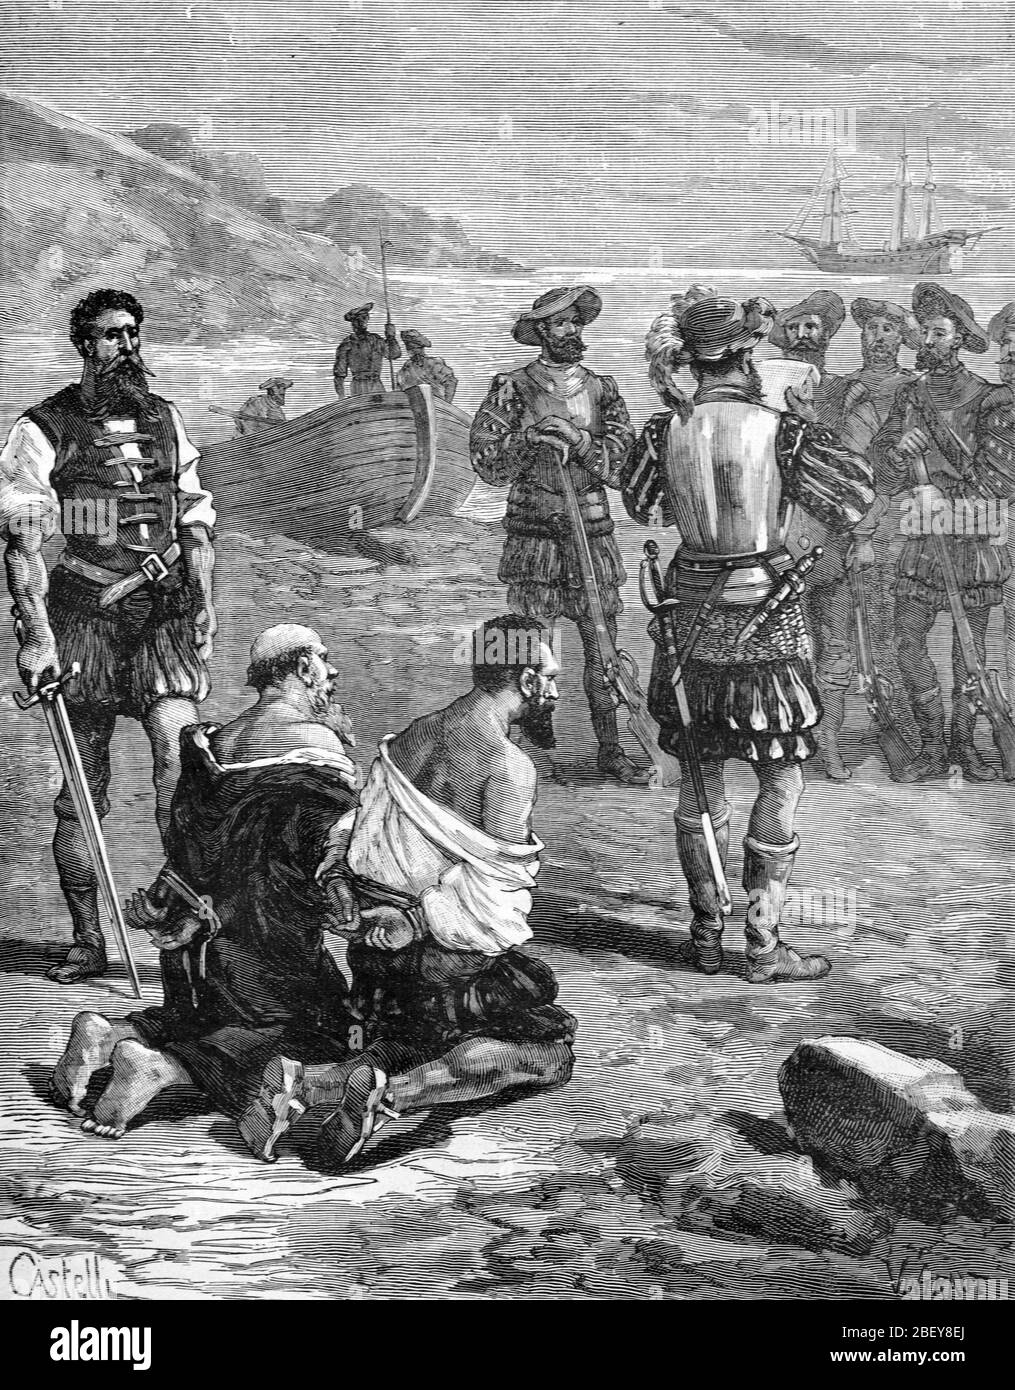 Port Famine, aka Puerto del Hambre or Ciudad del Rey Don Felipe, a Historic Spanish Colony or Settlement Site in Patagonia Chile. Spanish Settlers Judging Mutineers (late c16th). Vintage or Old Illustration or Engraving 1888 Stock Photo